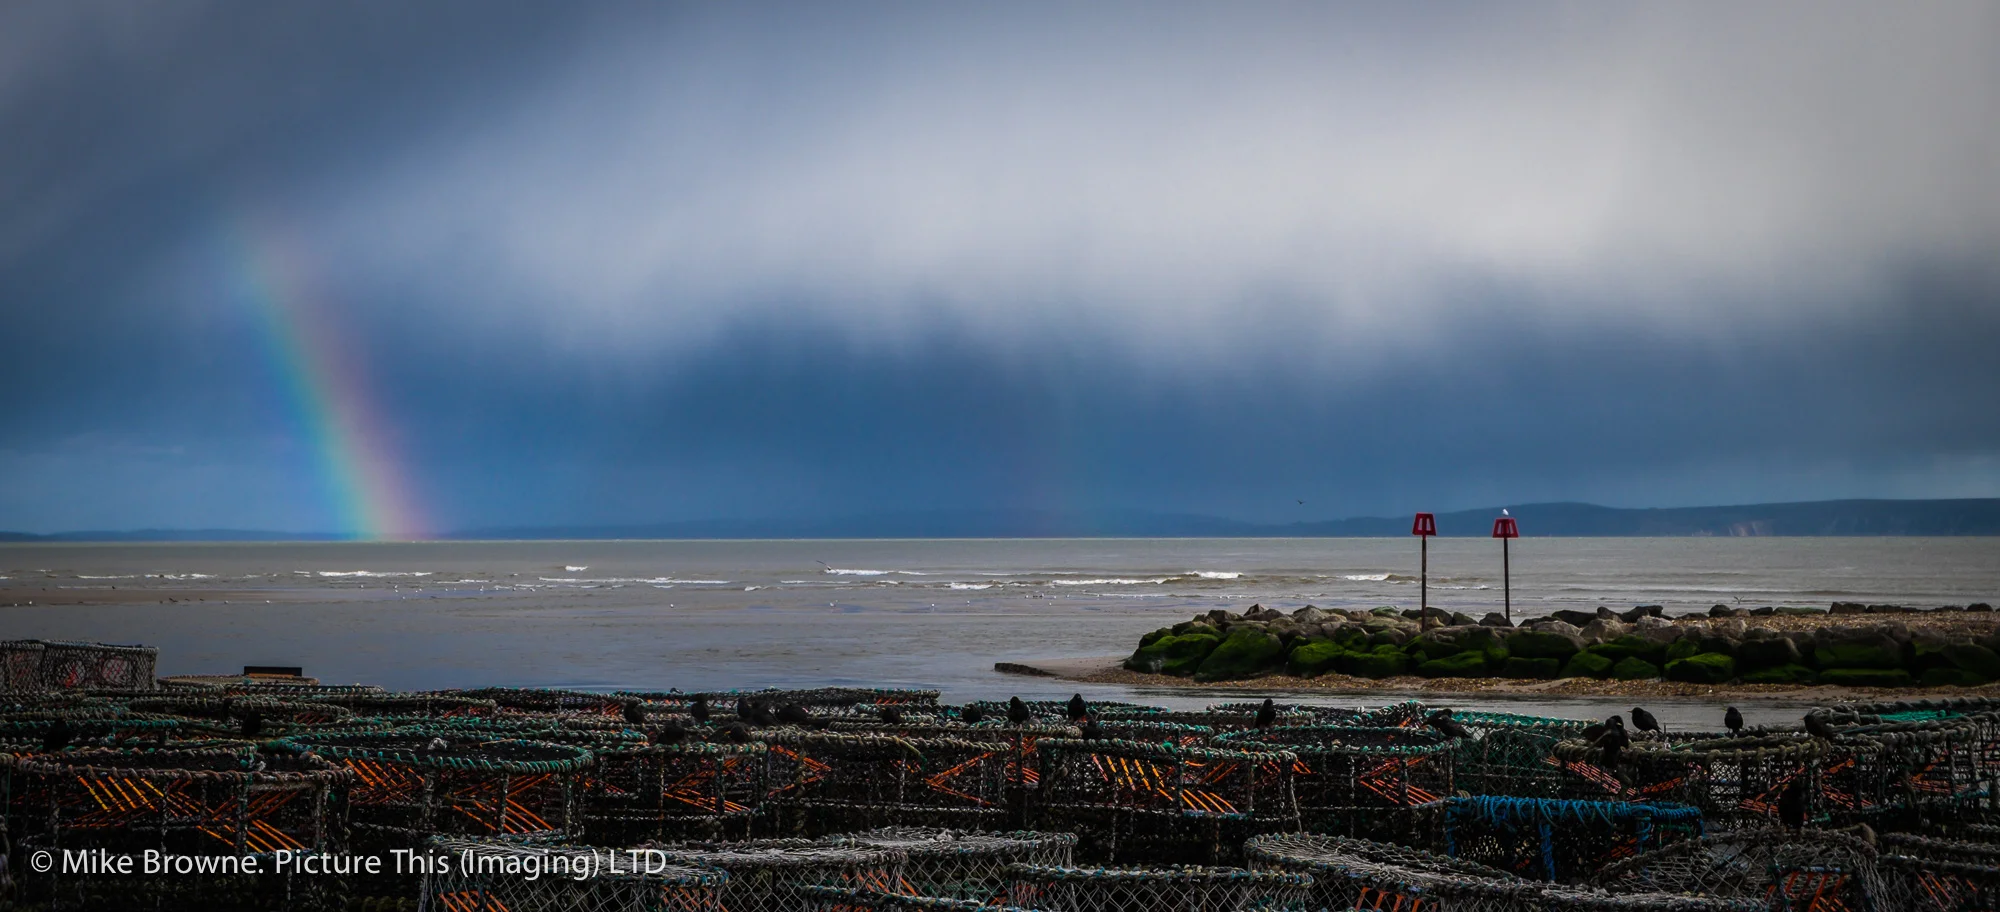 Lobster pots on a quayside and a rainbow over the sea behind them